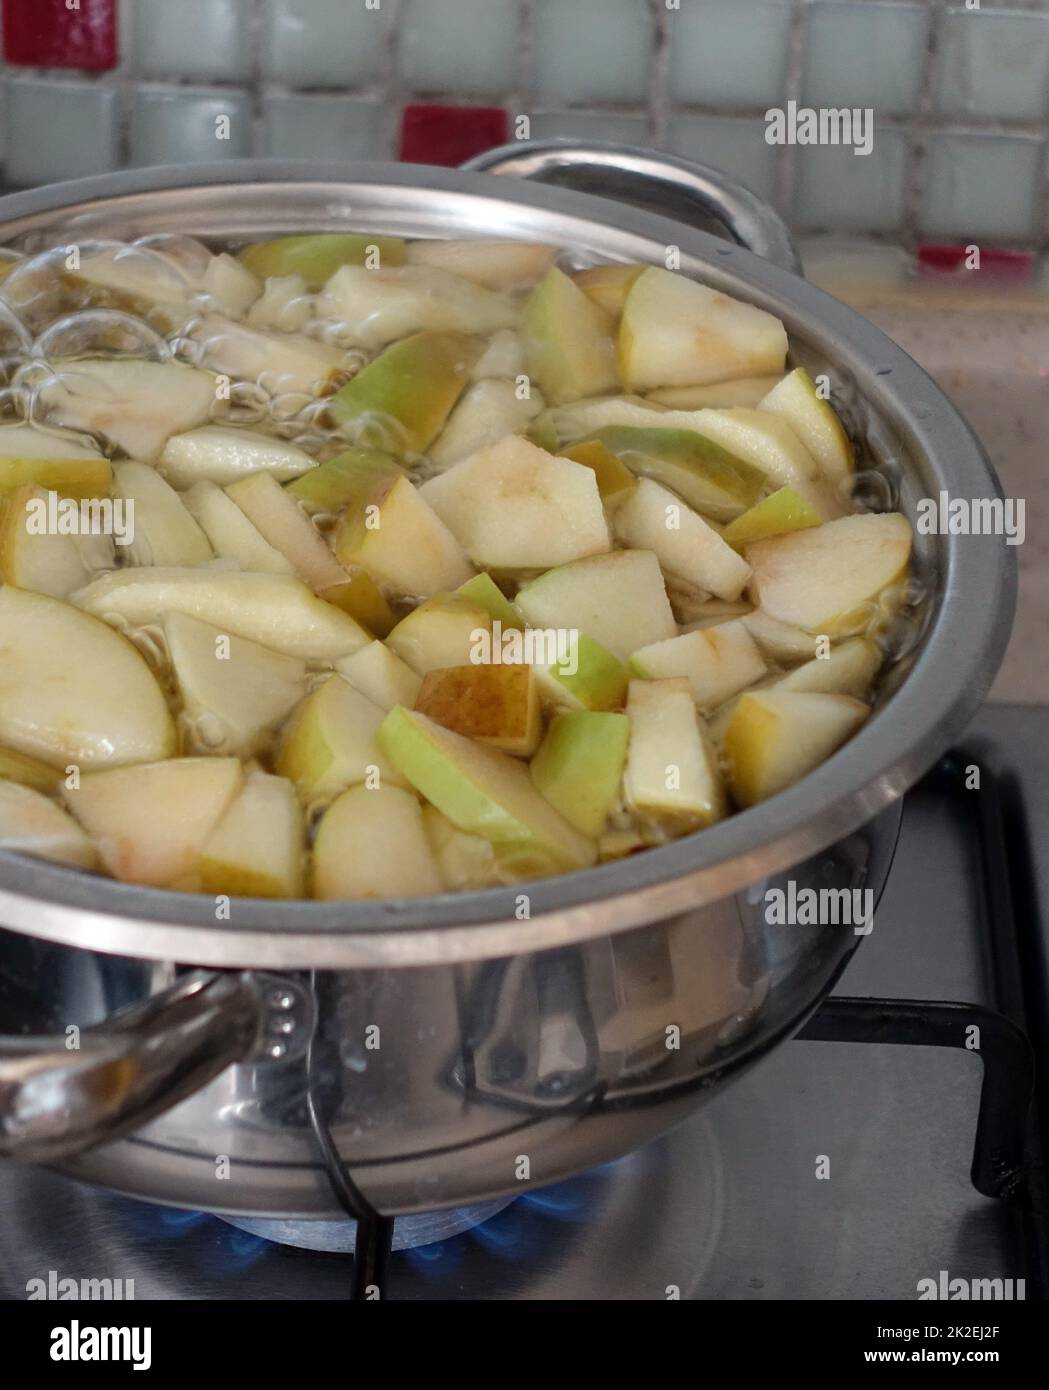 freshly chopped green sour apple pieces boiling in pot,make homemade apple juice Stock Photo